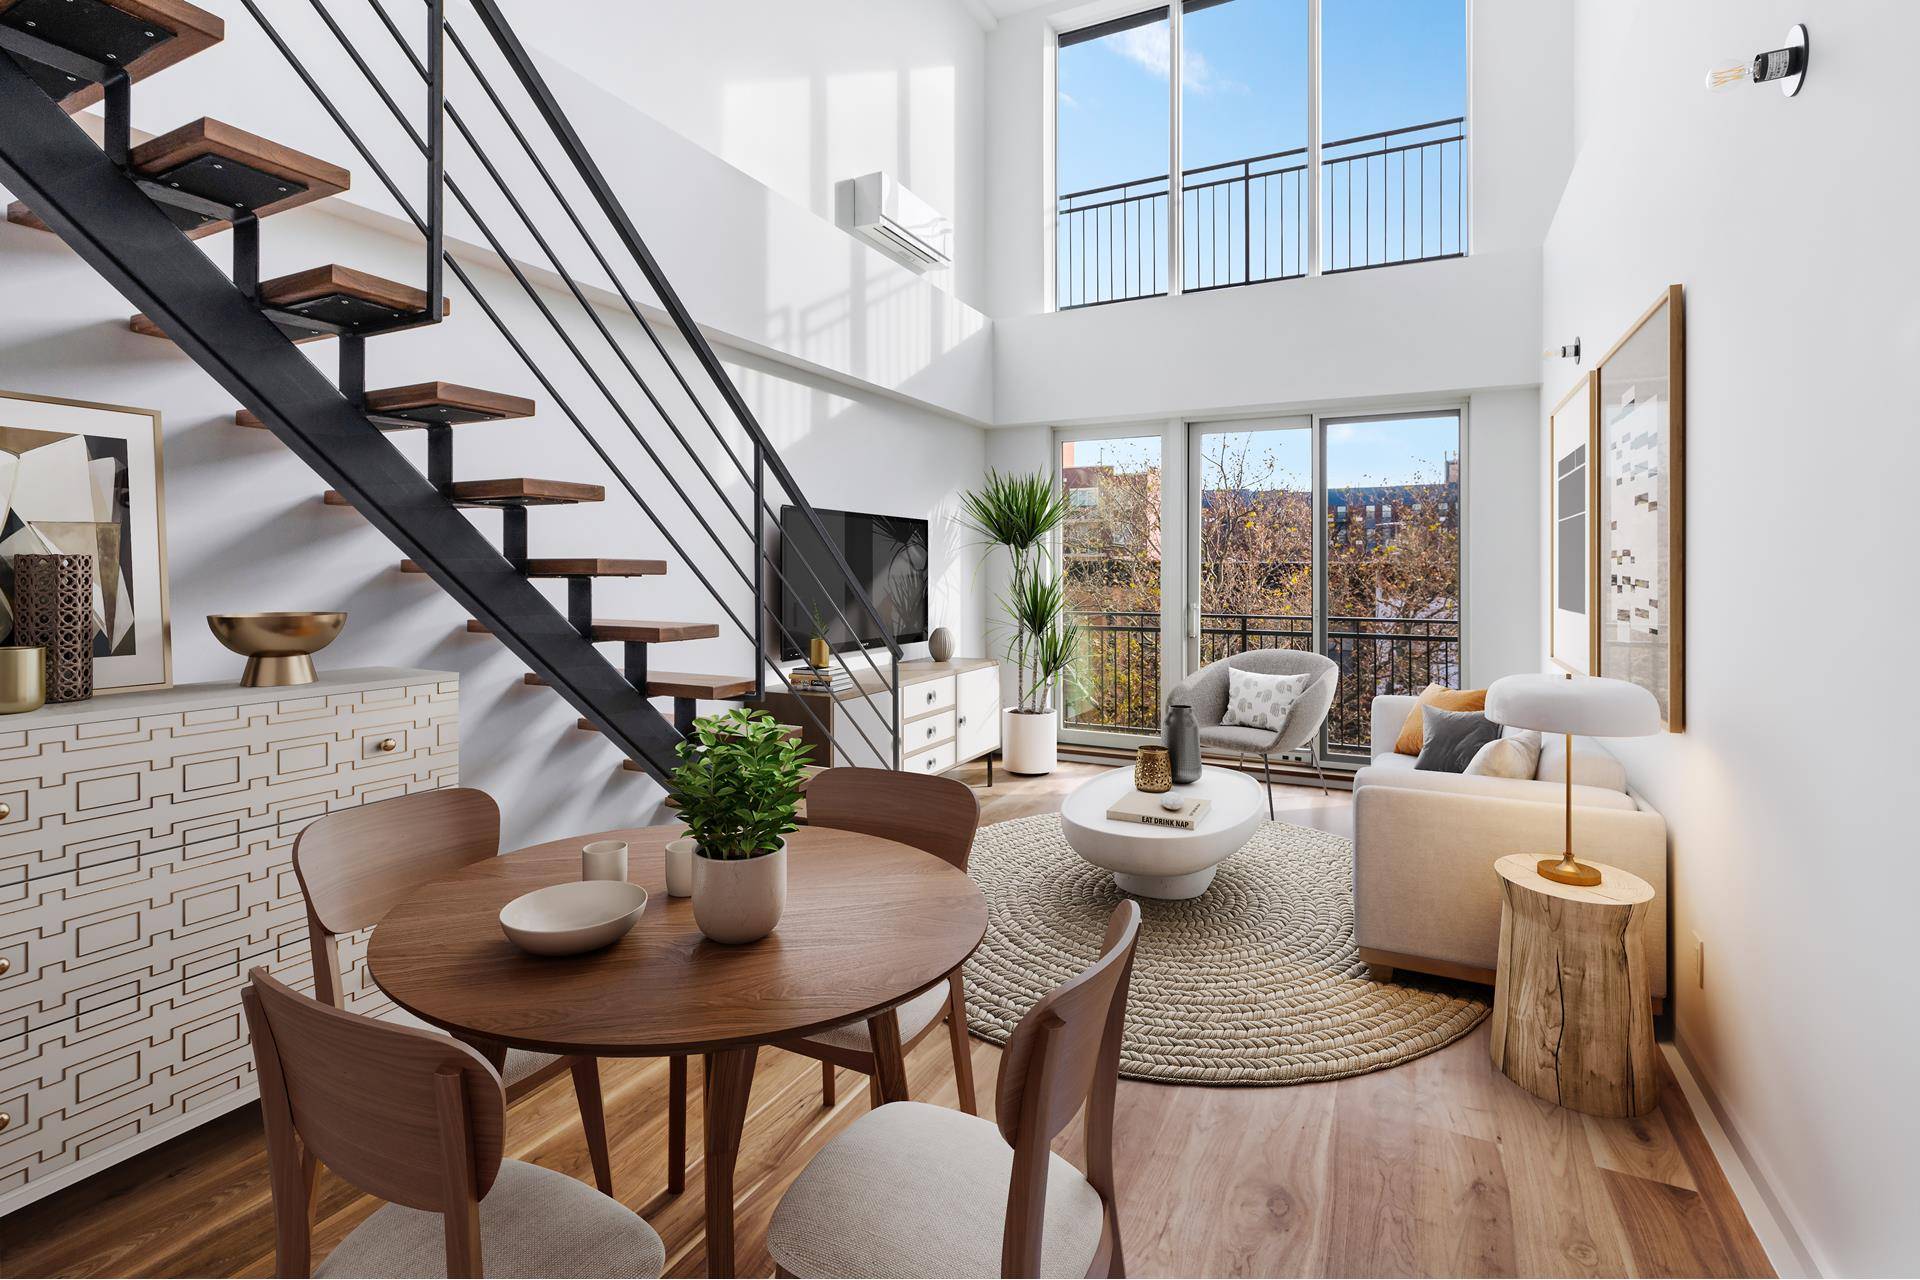 IMMEDIATE OCCUPANCY Bedford Stuyvesant named one of the TOP FIVE coolest neighborhoods in the WORLD as per TimeOut 10 06 2020 459 Quincy Street, situated in the heart of Bedford ...